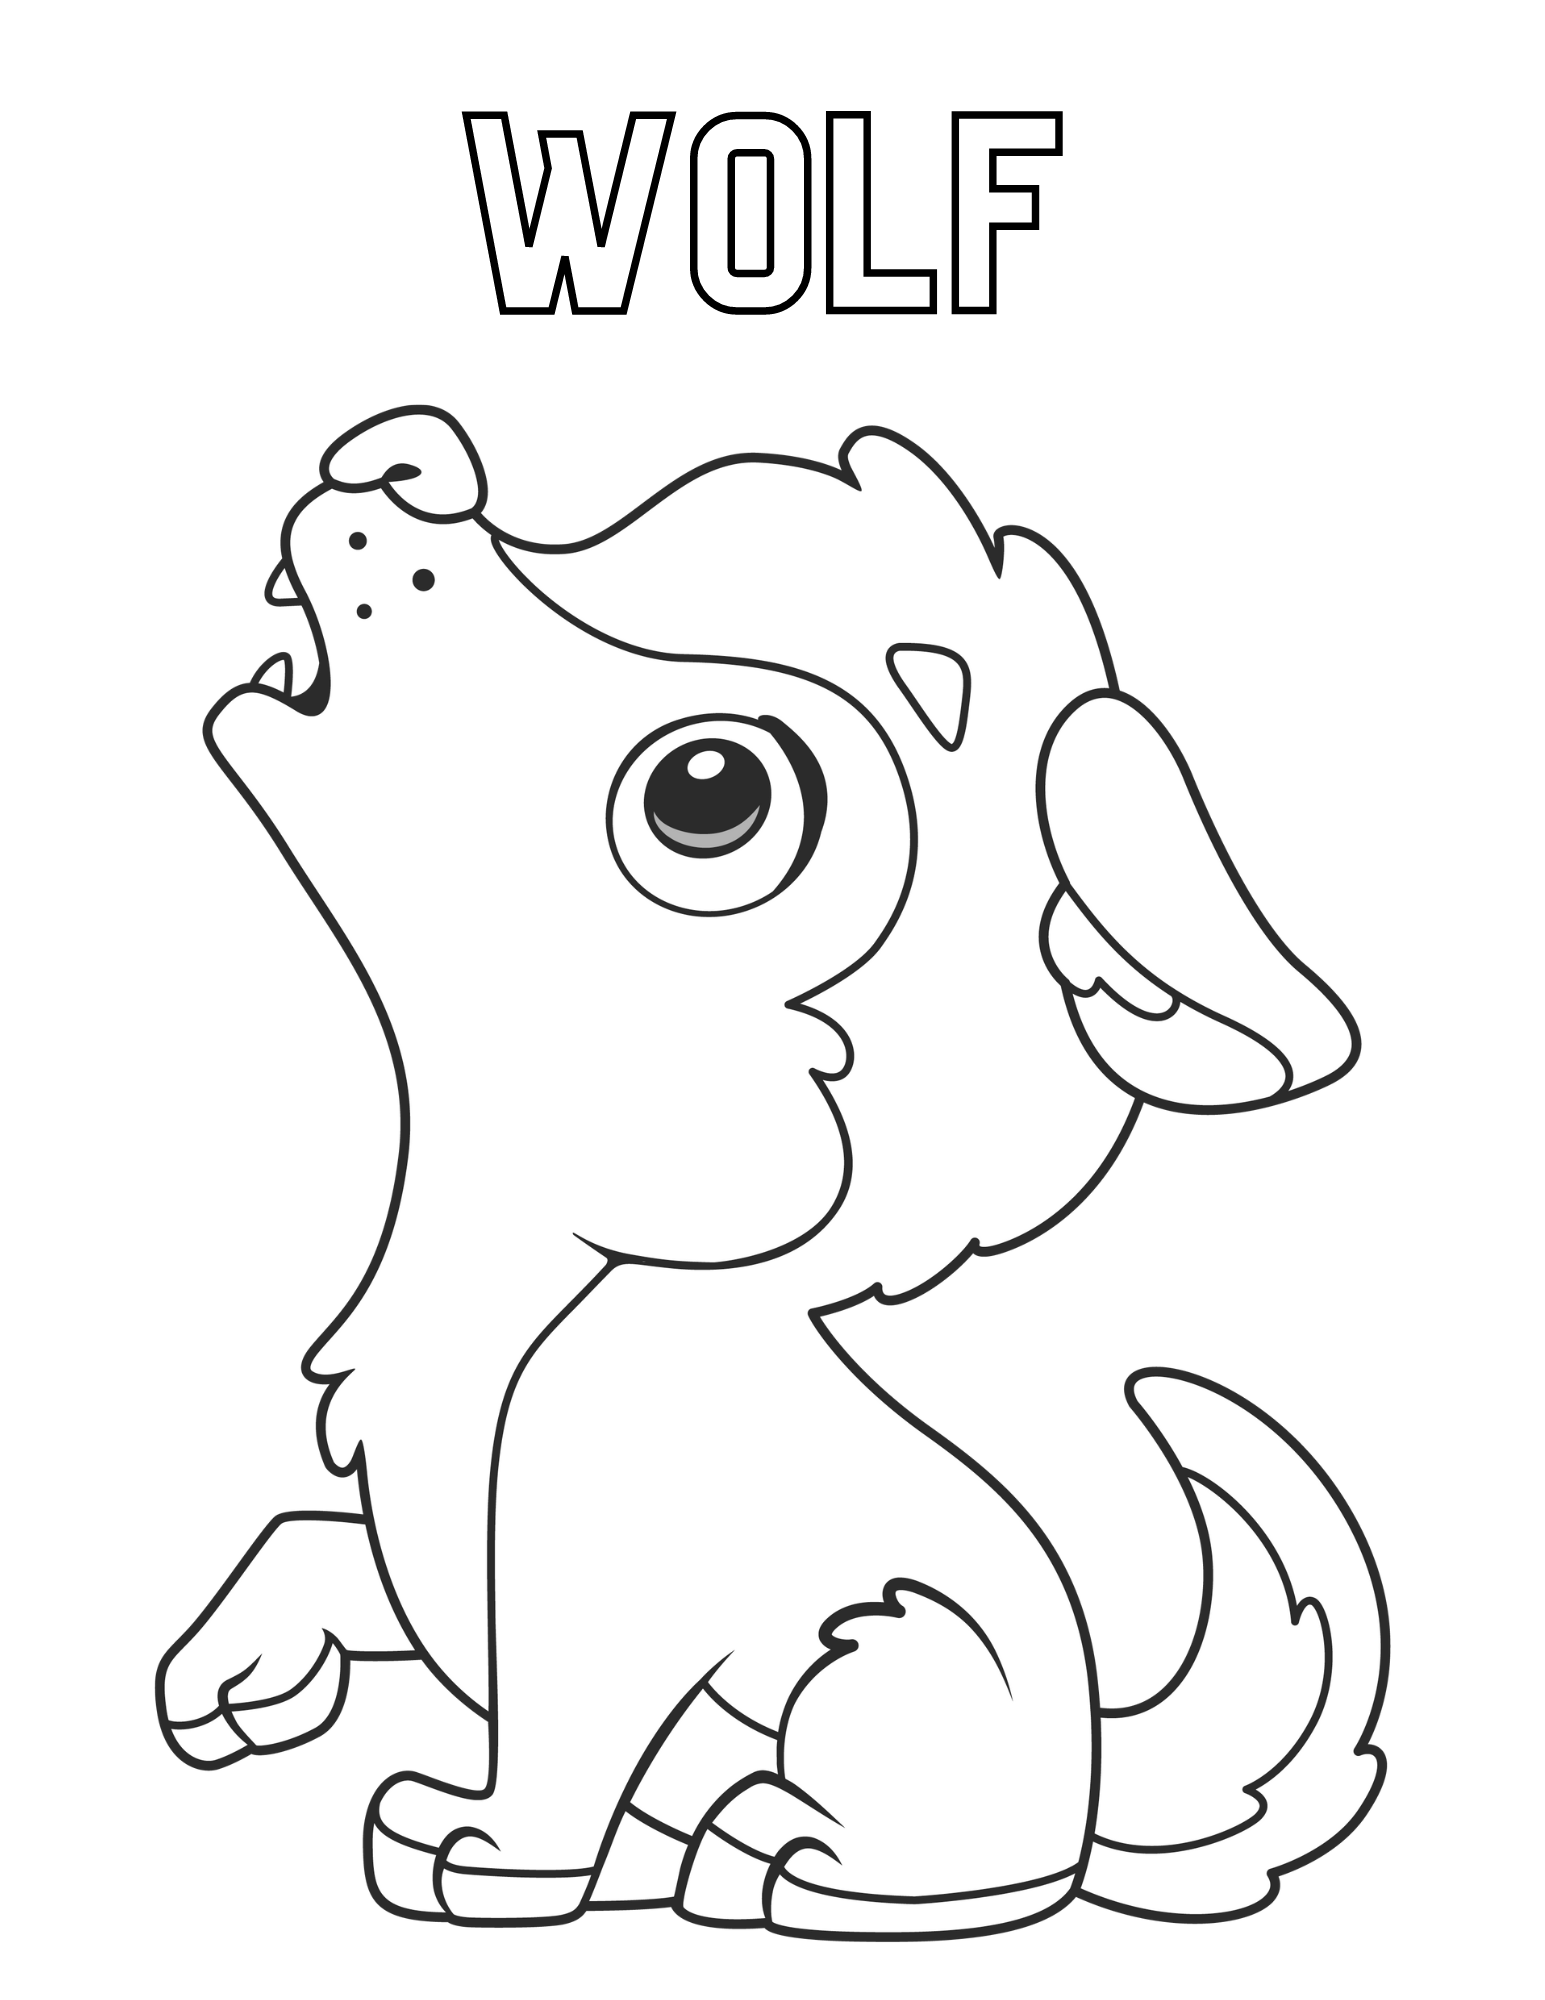 cute werewolf coloring pages